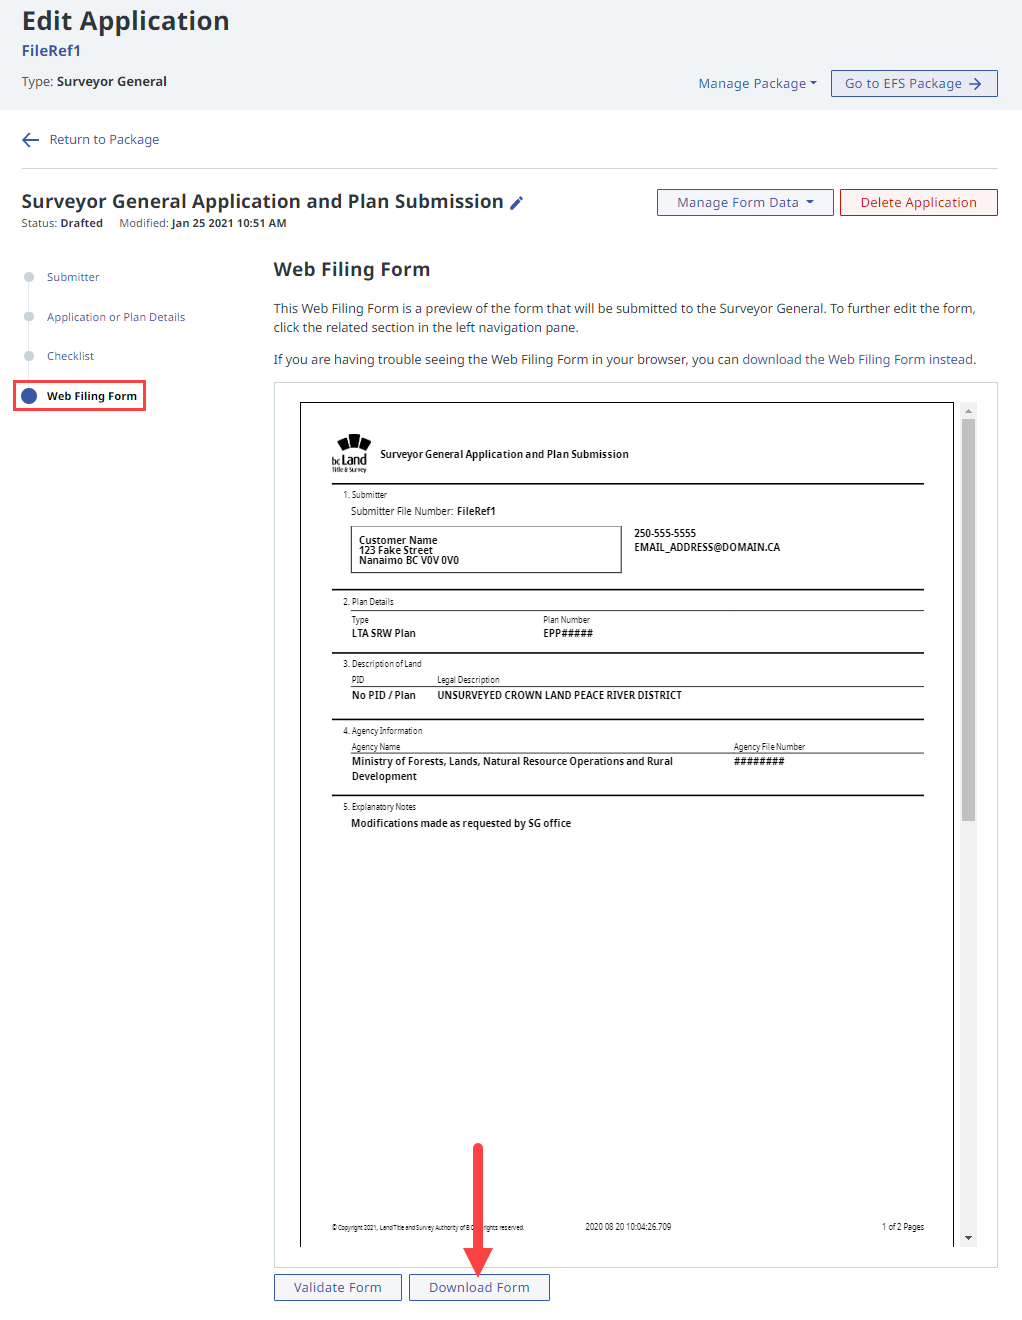 Web Filing Form Section